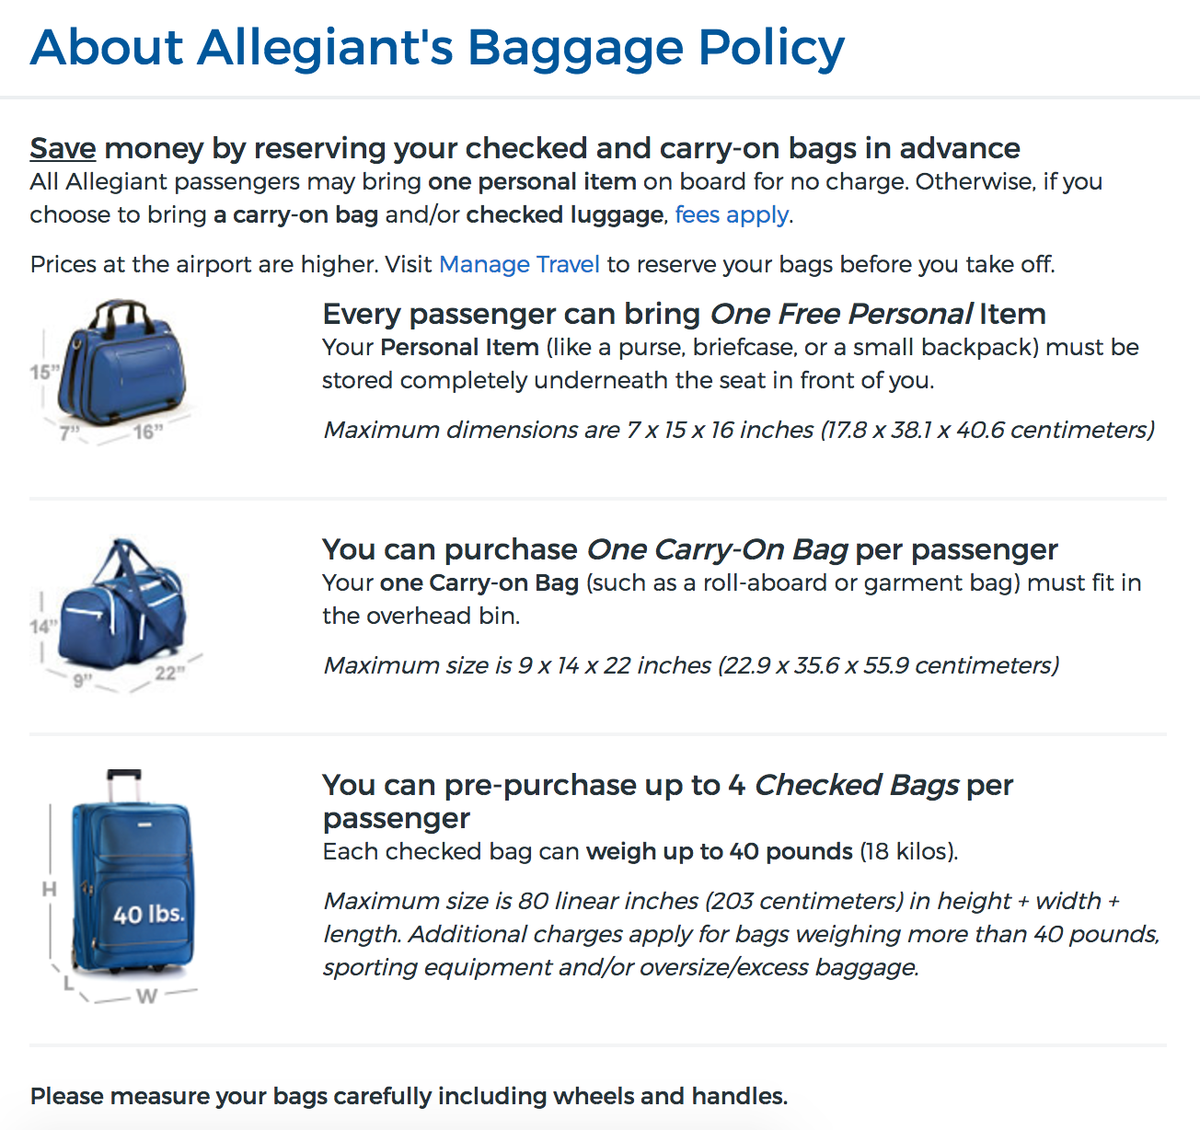 Allegiant's Baggage Policy